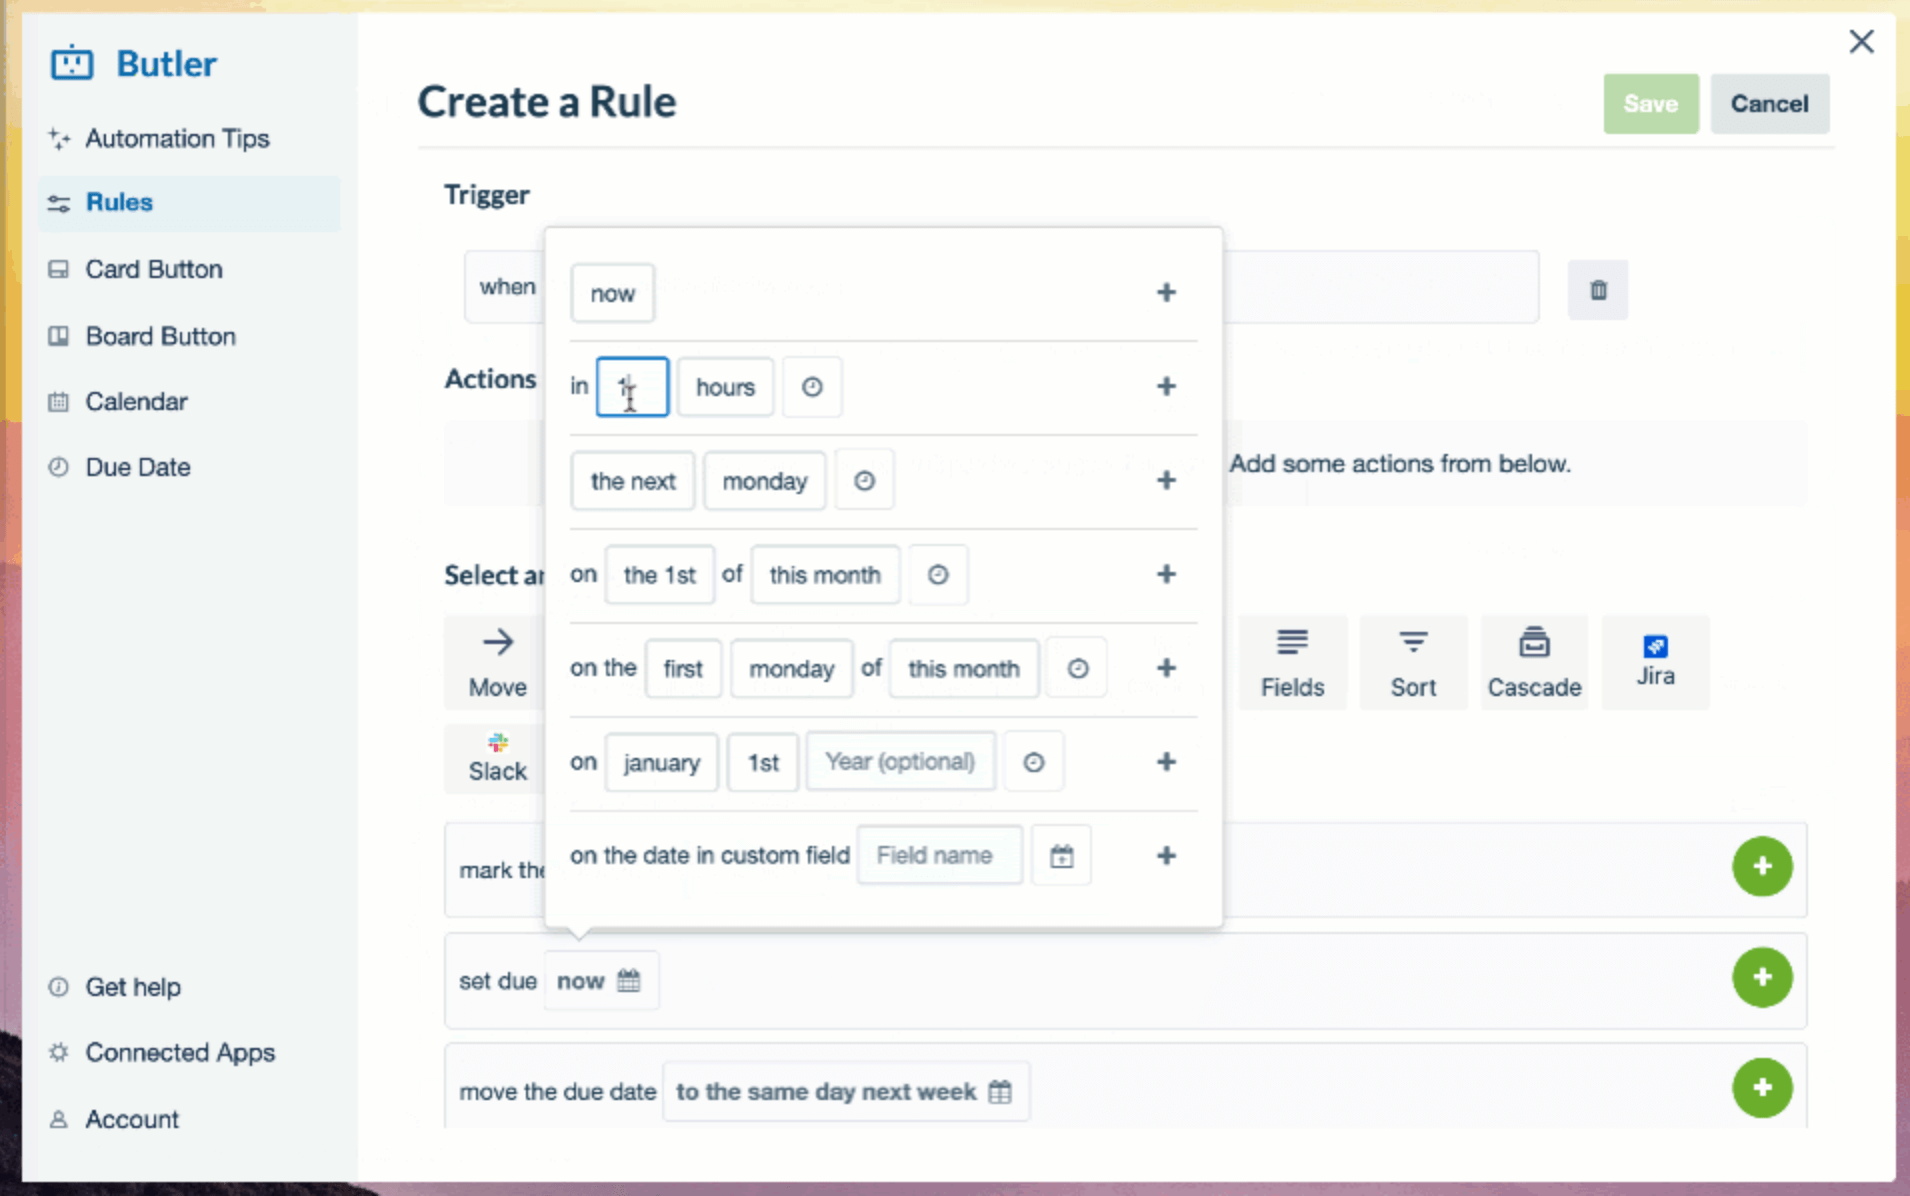 Trello Guides: Help Getting Started With Trello